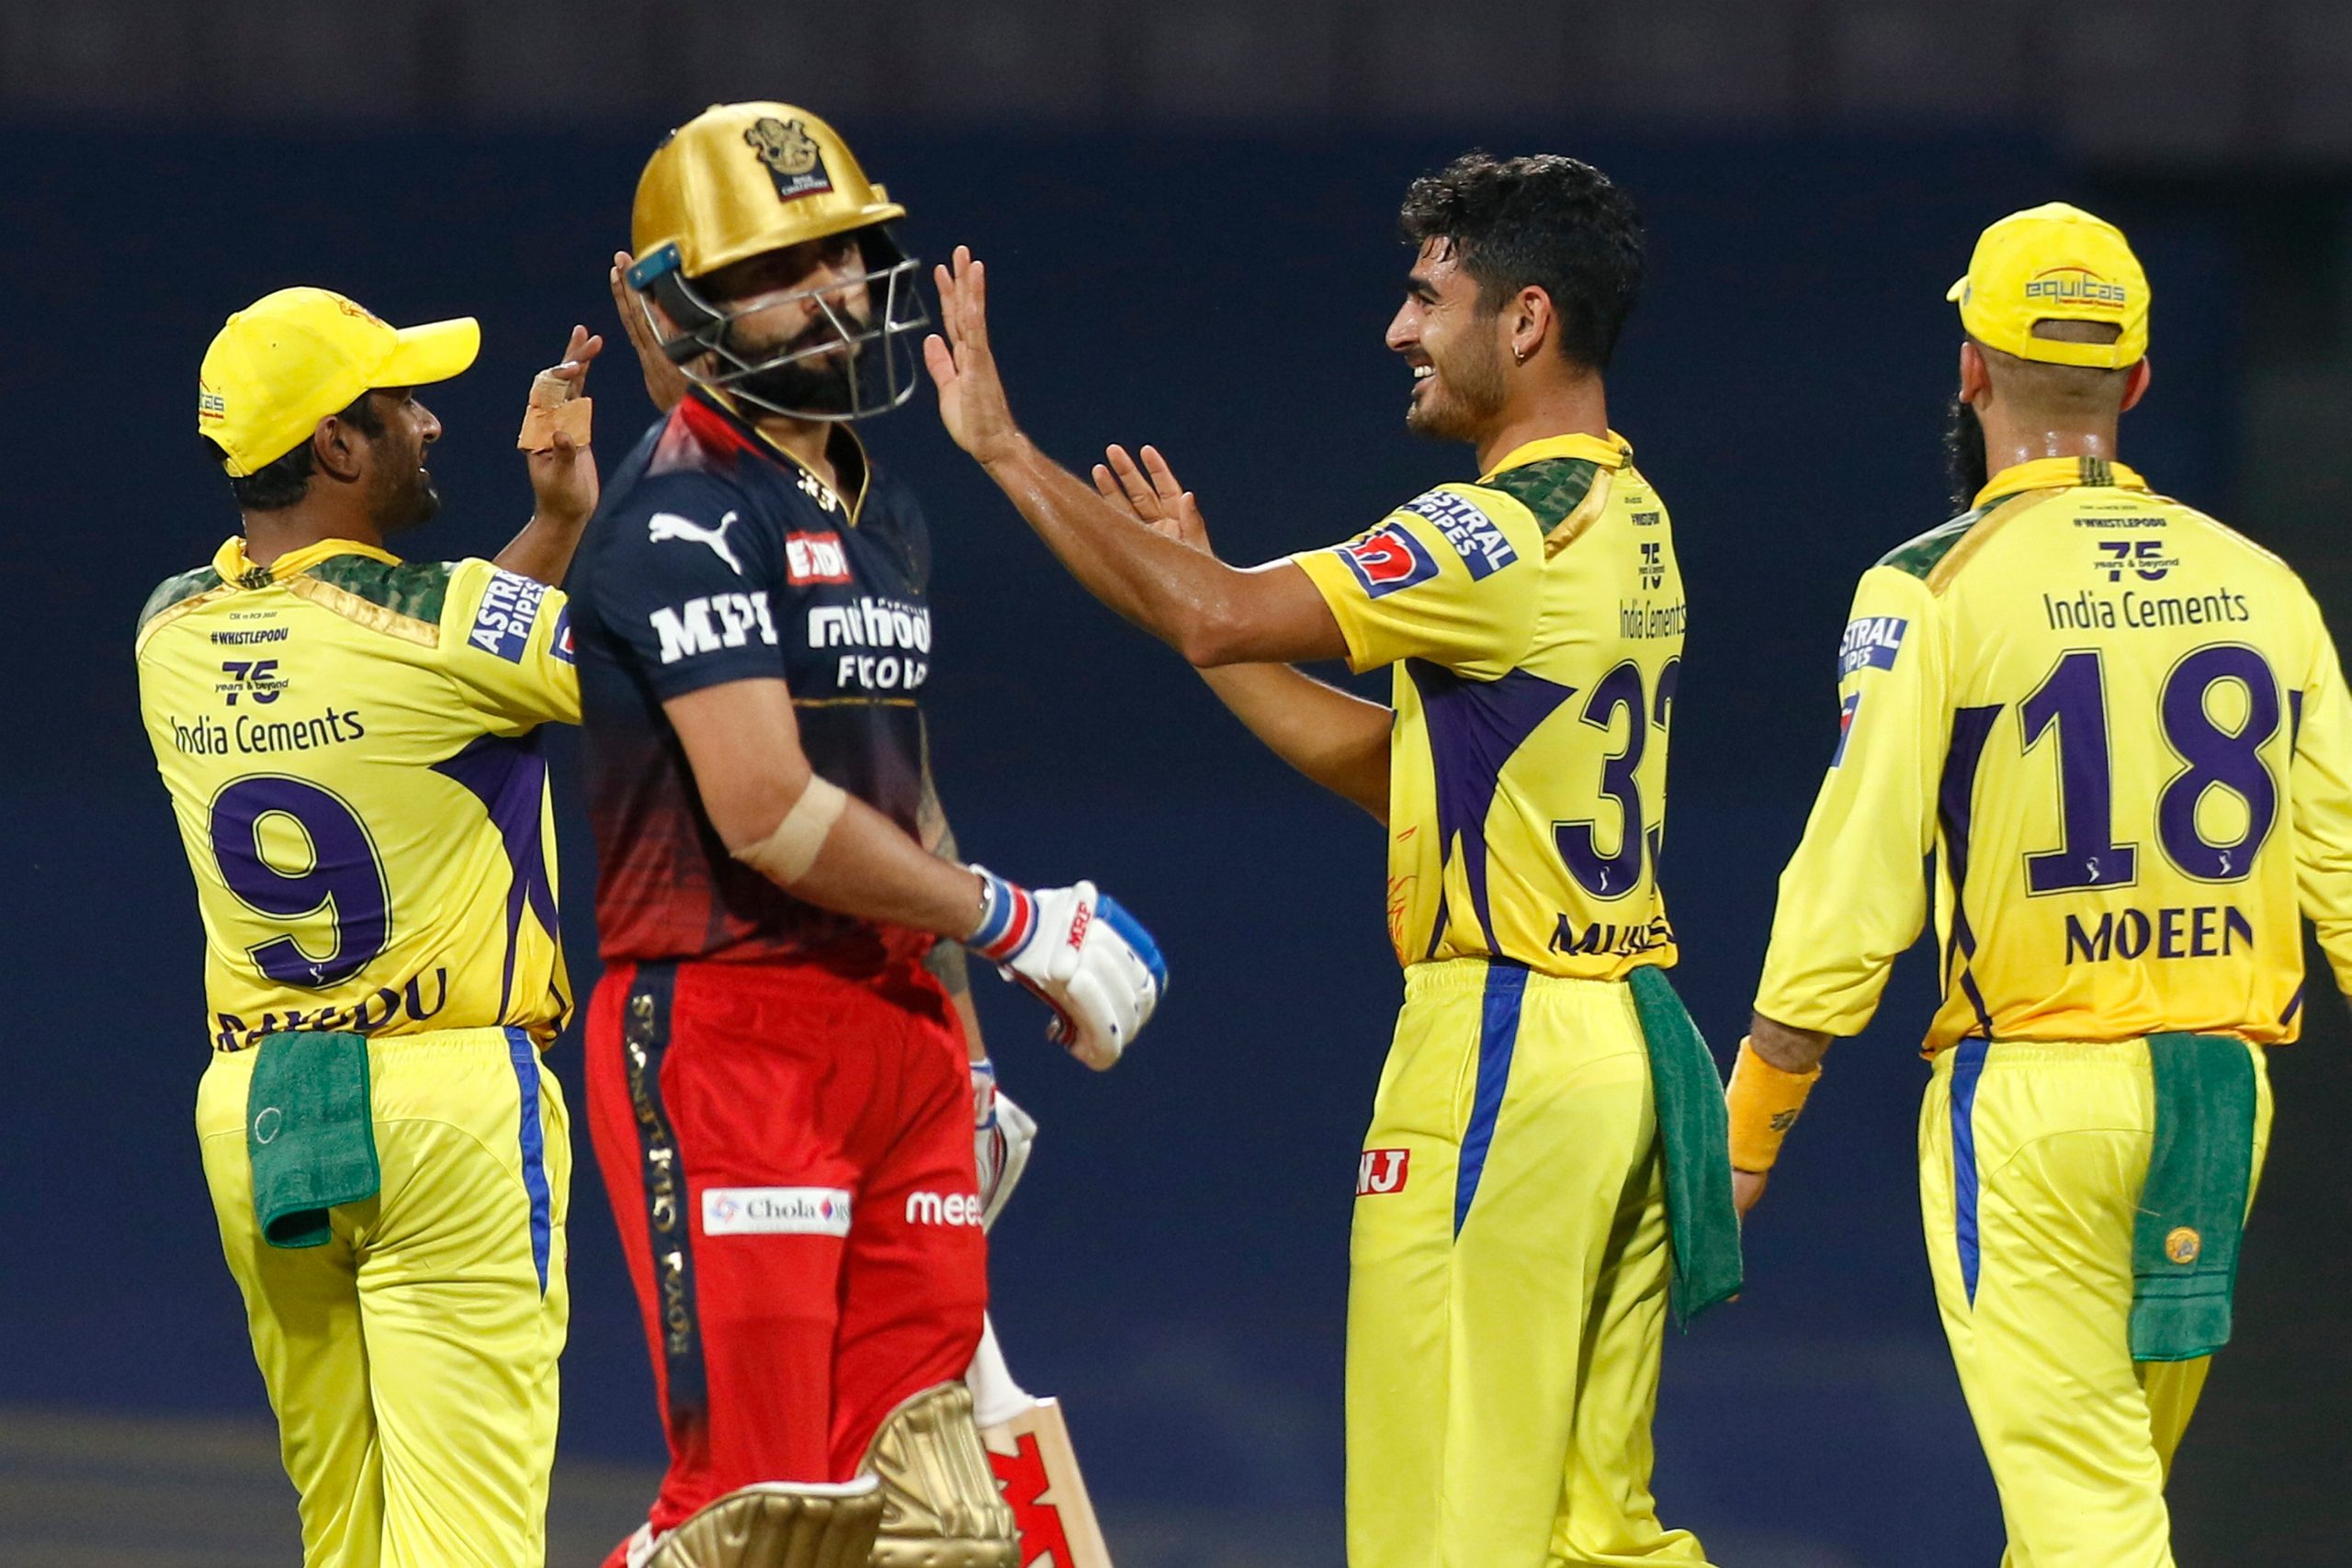 Chennai Super Kings score first points in IPL 2022, and in style